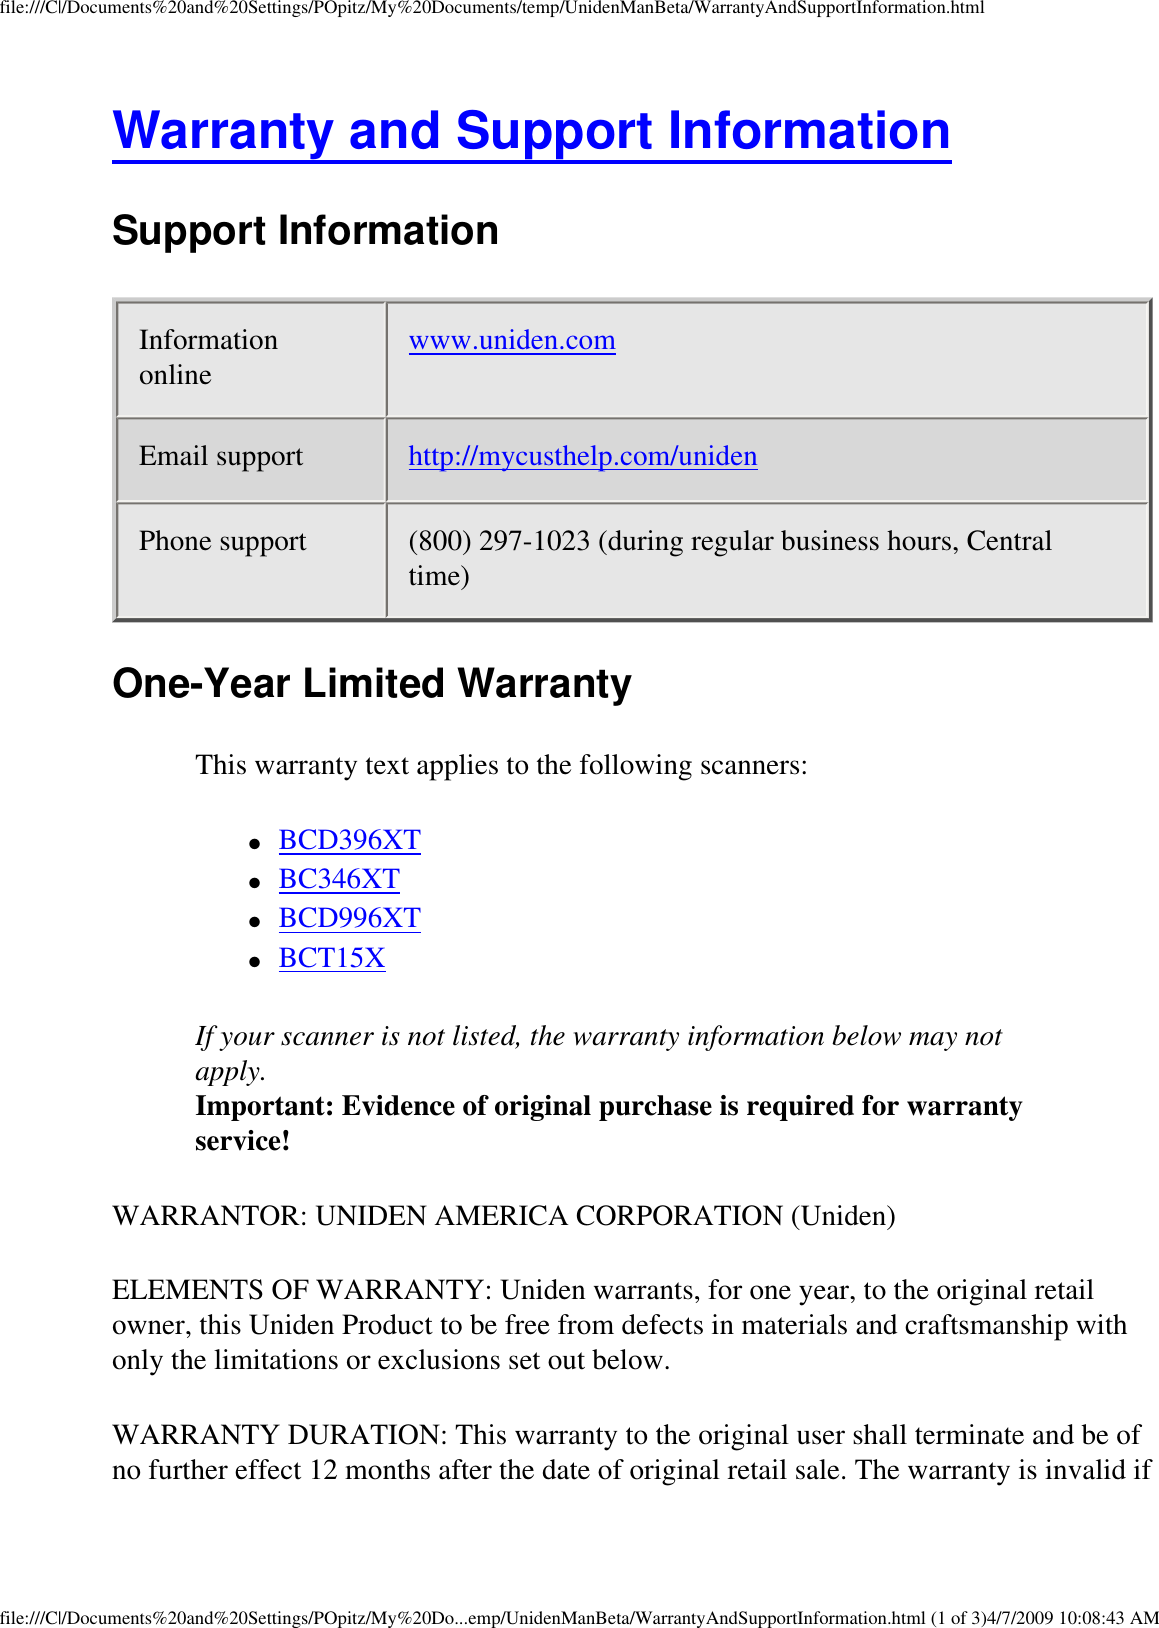 file:///C|/Documents%20and%20Settings/POpitz/My%20Documents/temp/UnidenManBeta/WarrantyAndSupportInformation.htmlWarranty and Support Information Support Information Information online  www.uniden.com Email support  http://mycusthelp.com/uniden Phone support  (800) 297-1023 (during regular business hours, Central time) One-Year Limited Warranty This warranty text applies to the following scanners: ●     BCD396XT ●     BC346XT ●     BCD996XT ●     BCT15X If your scanner is not listed, the warranty information below may not apply.  Important: Evidence of original purchase is required for warranty service! WARRANTOR: UNIDEN AMERICA CORPORATION (Uniden) ELEMENTS OF WARRANTY: Uniden warrants, for one year, to the original retail owner, this Uniden Product to be free from defects in materials and craftsmanship with only the limitations or exclusions set out below. WARRANTY DURATION: This warranty to the original user shall terminate and be of no further effect 12 months after the date of original retail sale. The warranty is invalid if file:///C|/Documents%20and%20Settings/POpitz/My%20Do...emp/UnidenManBeta/WarrantyAndSupportInformation.html (1 of 3)4/7/2009 10:08:43 AM